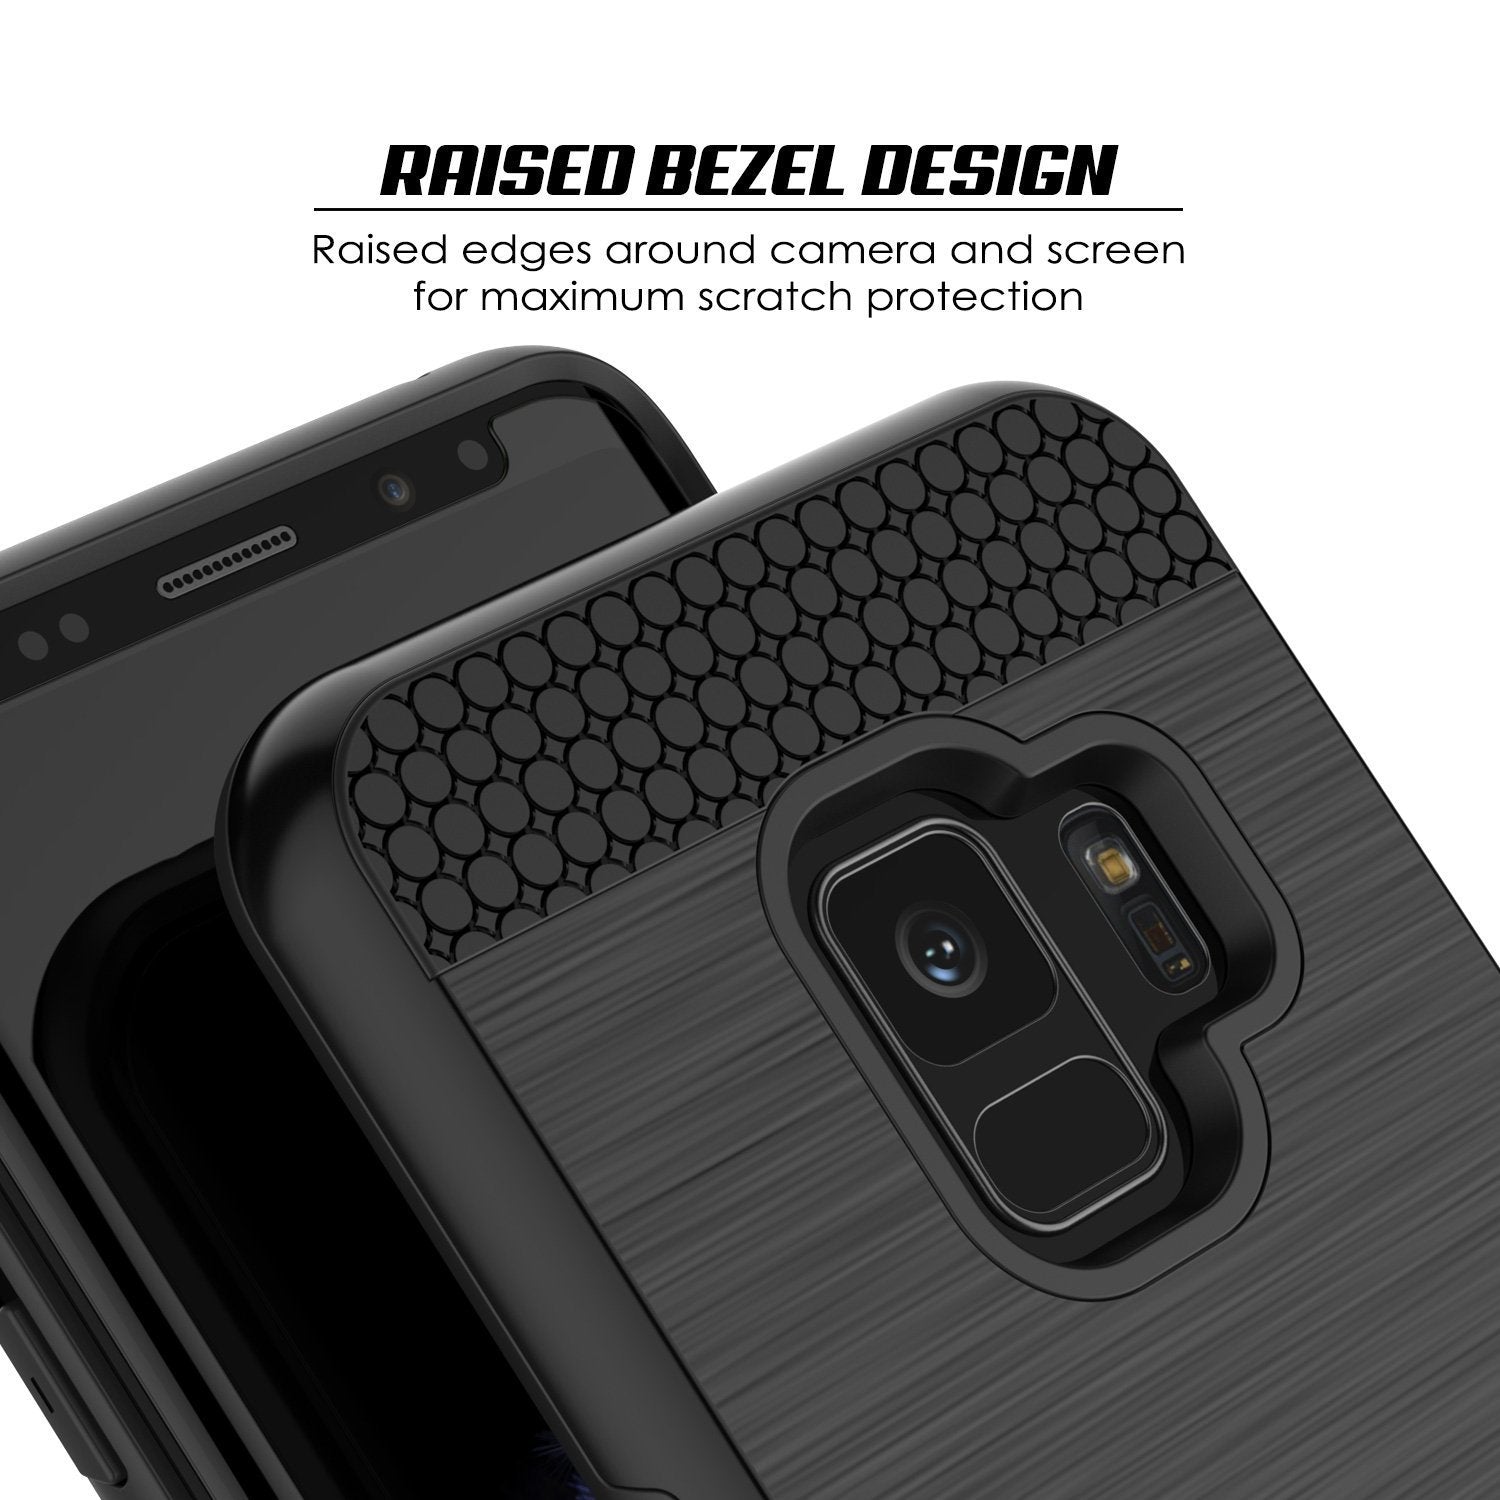 Galaxy S9 case, Punkcase SLOT Series Dual-Layer Cover [Black]